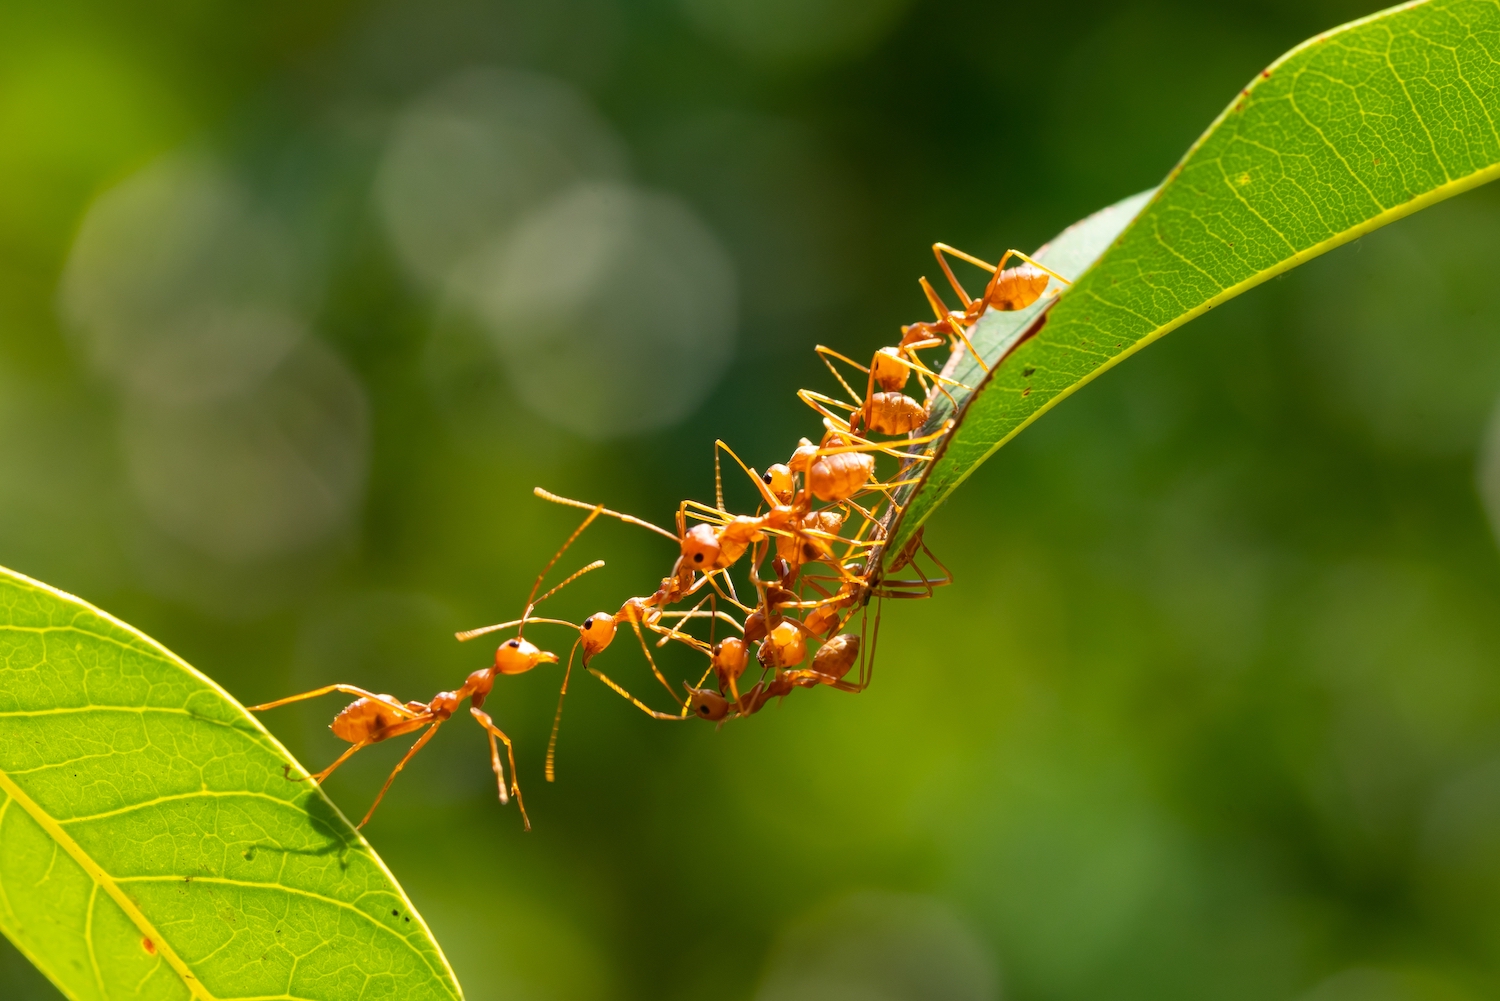 Ants moving from leaf to leaf.